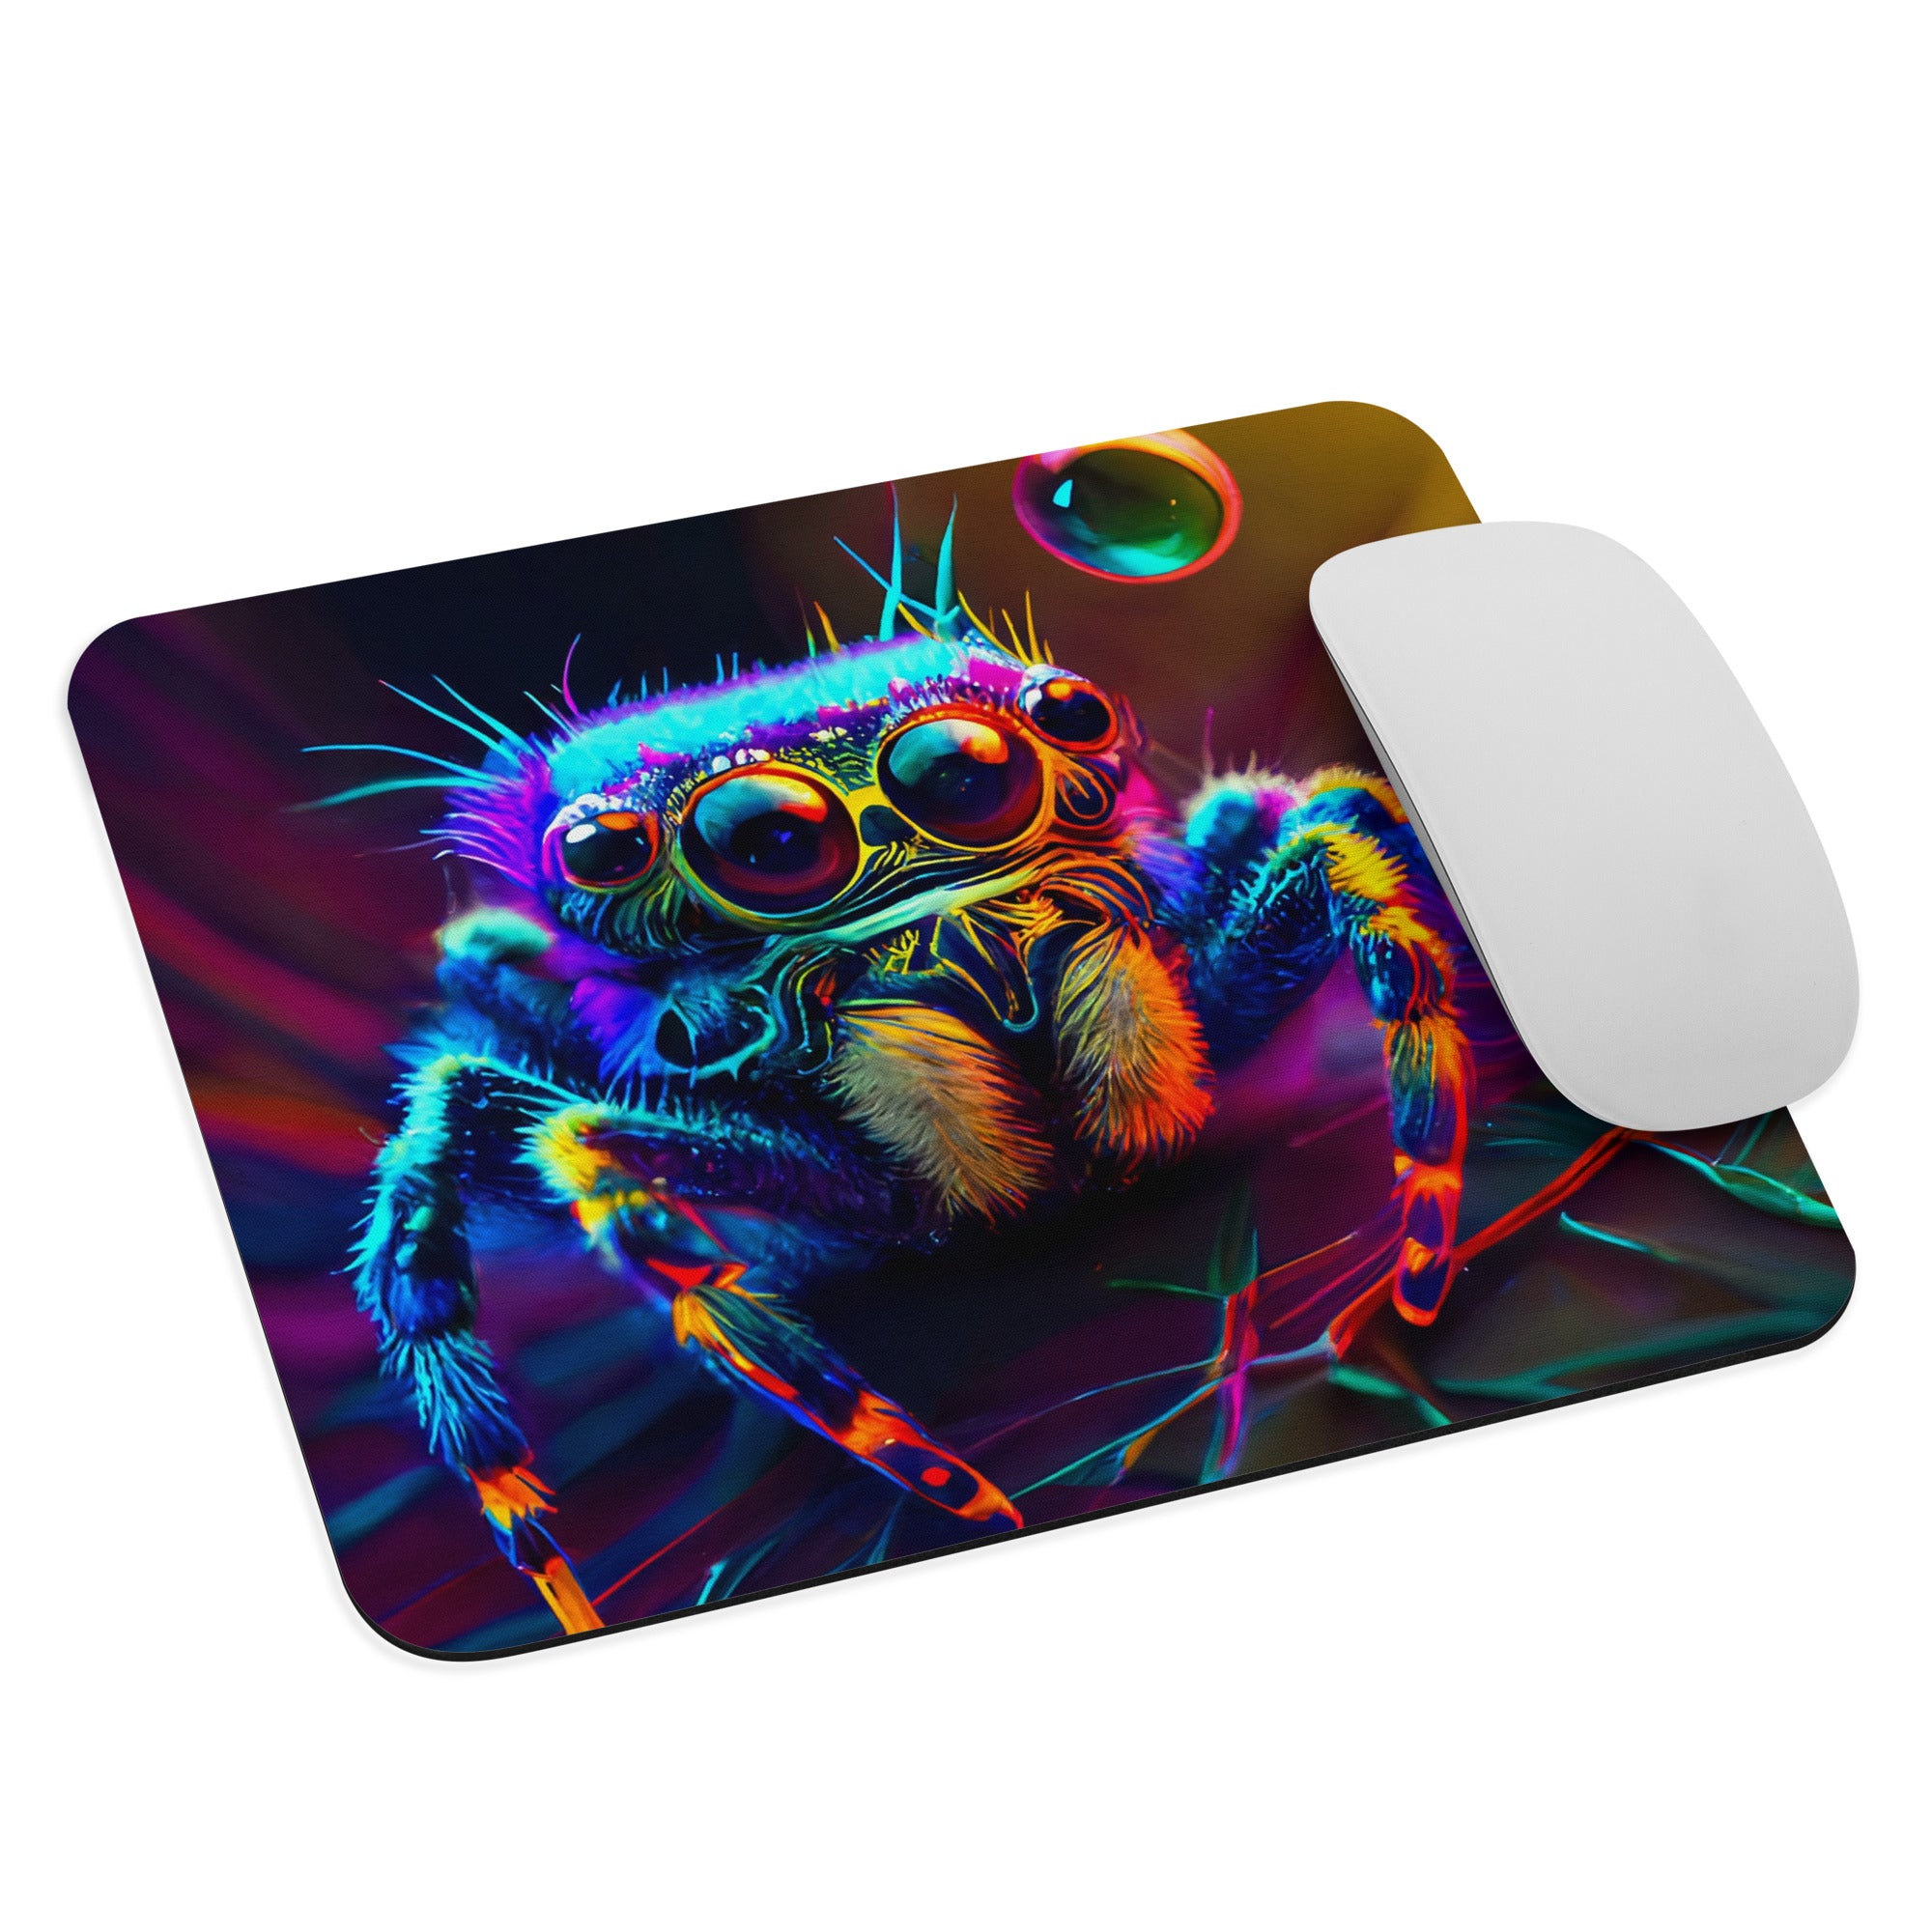 Trippy Regal Jumping Spider Mouse pad - Jumping Spiders For Sale - Spiders Source - #1 Regal Jumping Spider Store